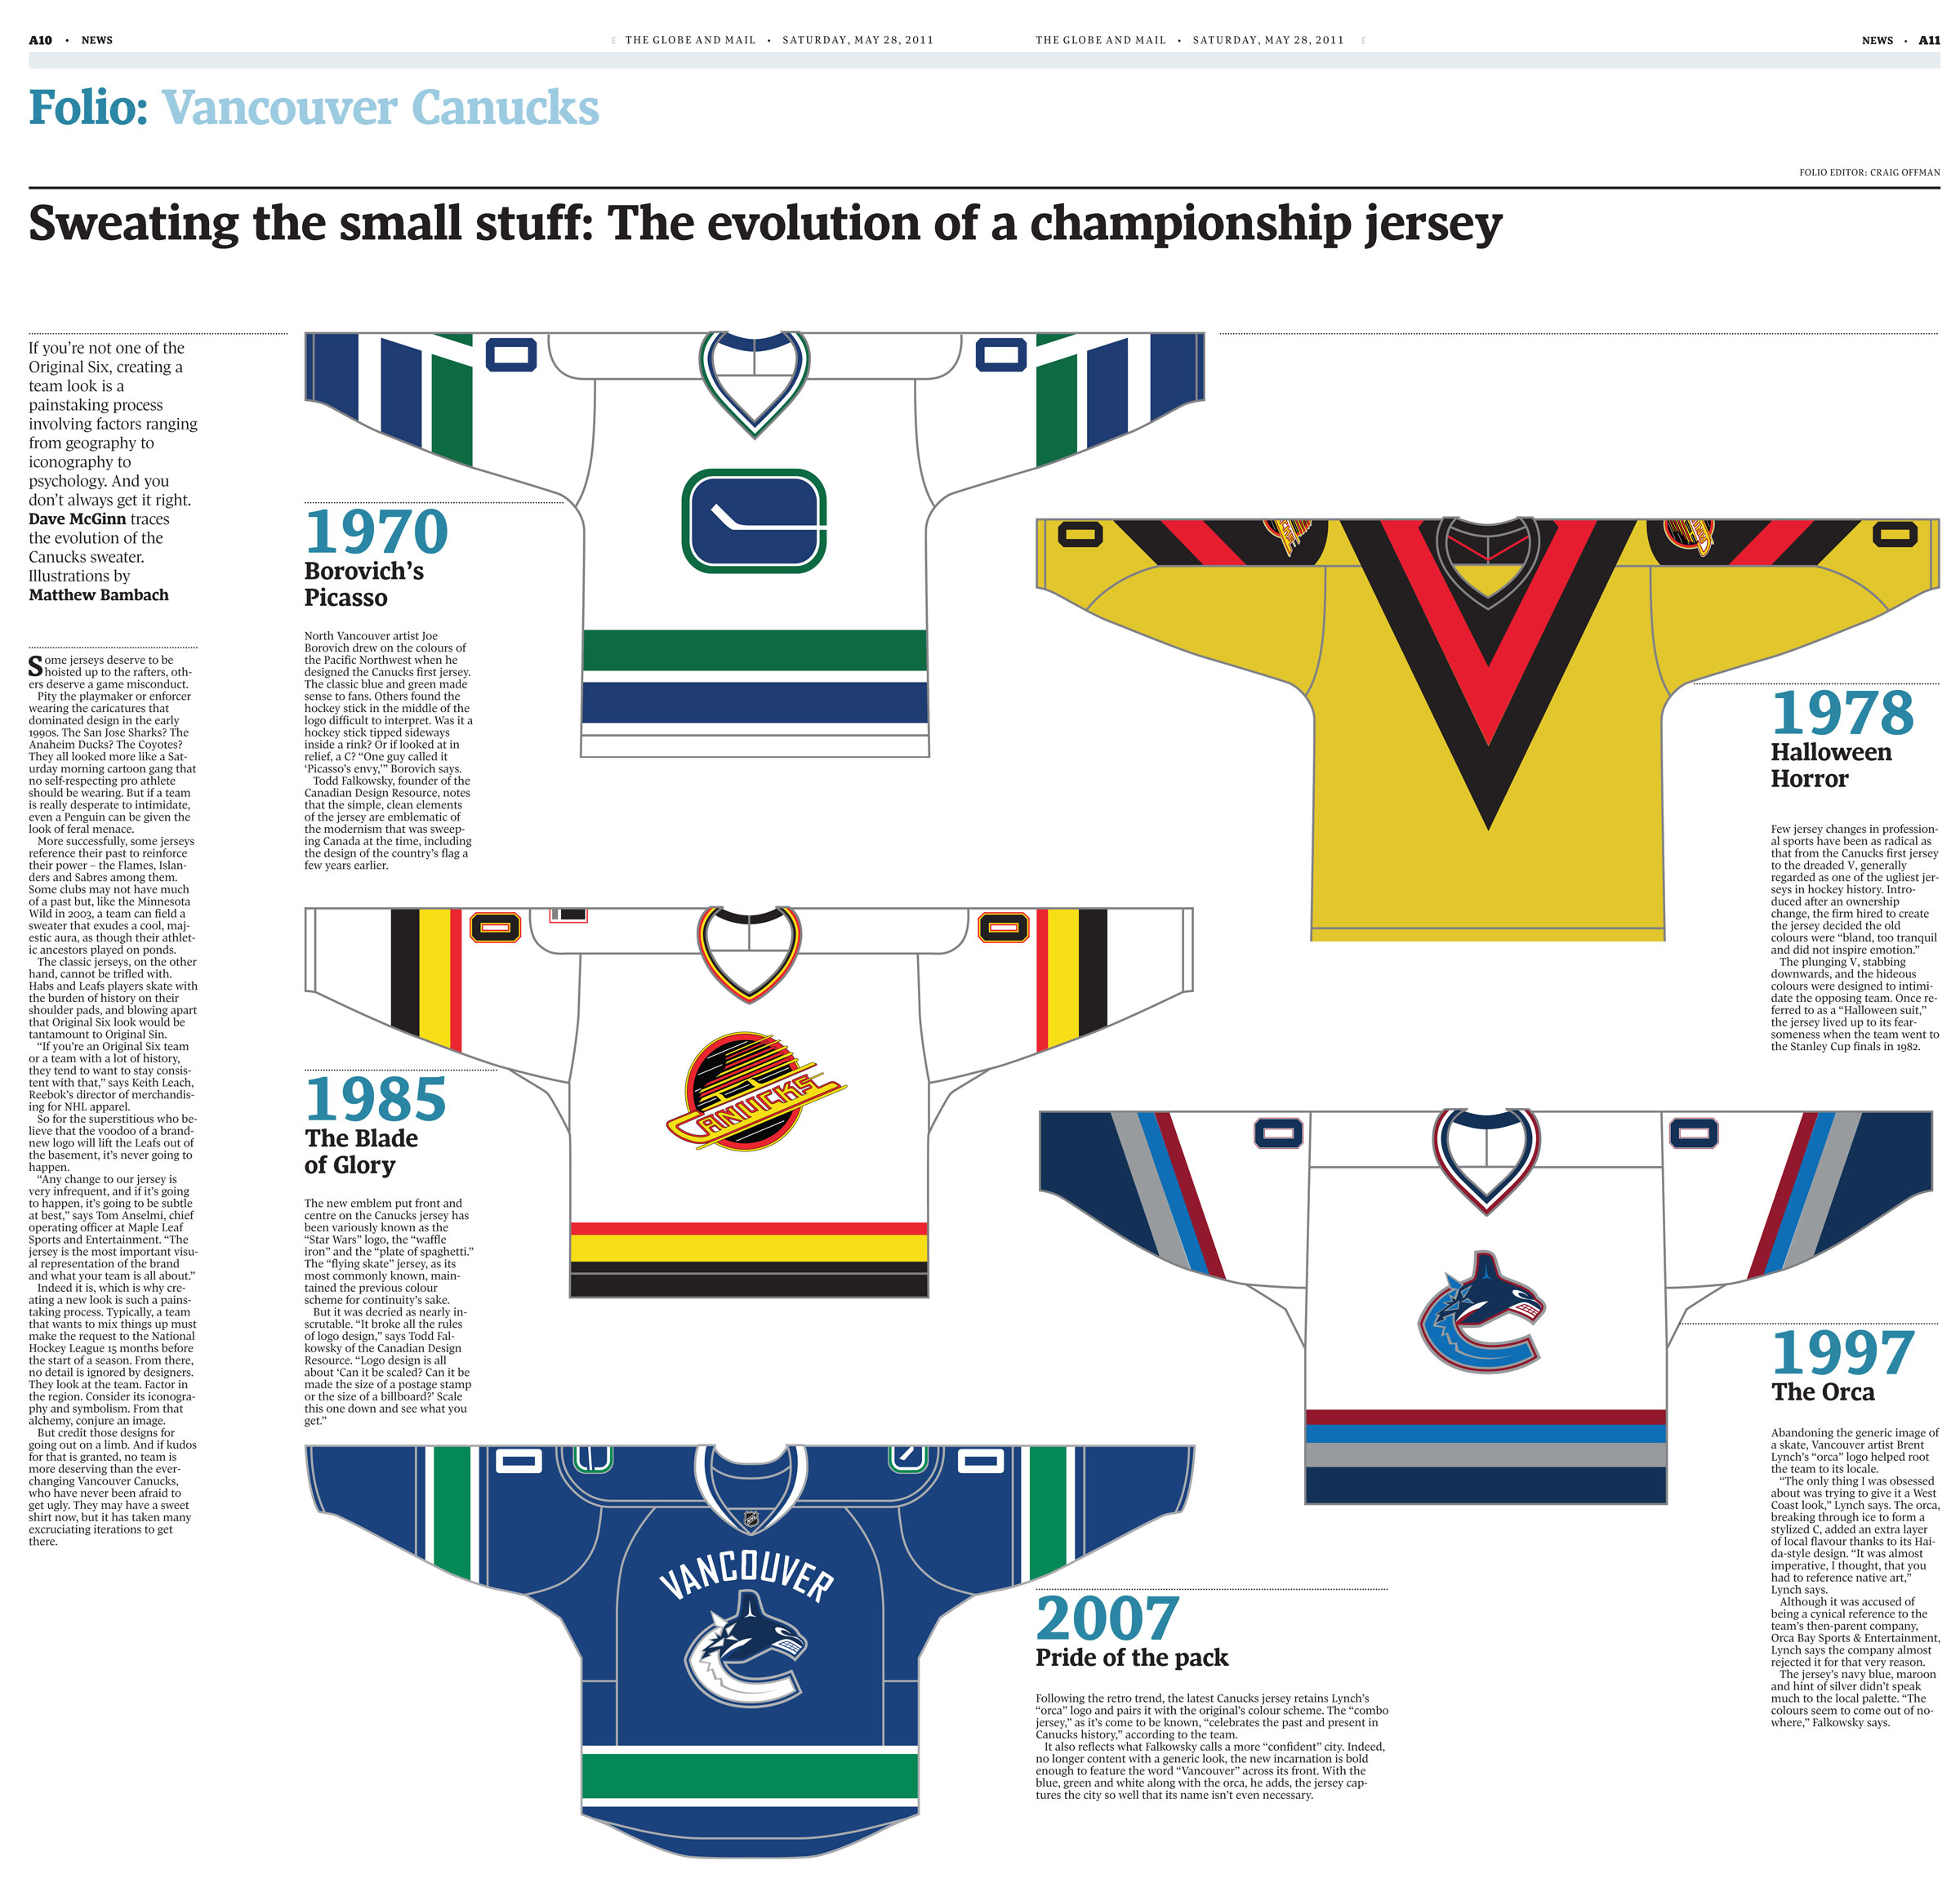 Canucks fans love the Flying Skate jersey, so why don't we see it